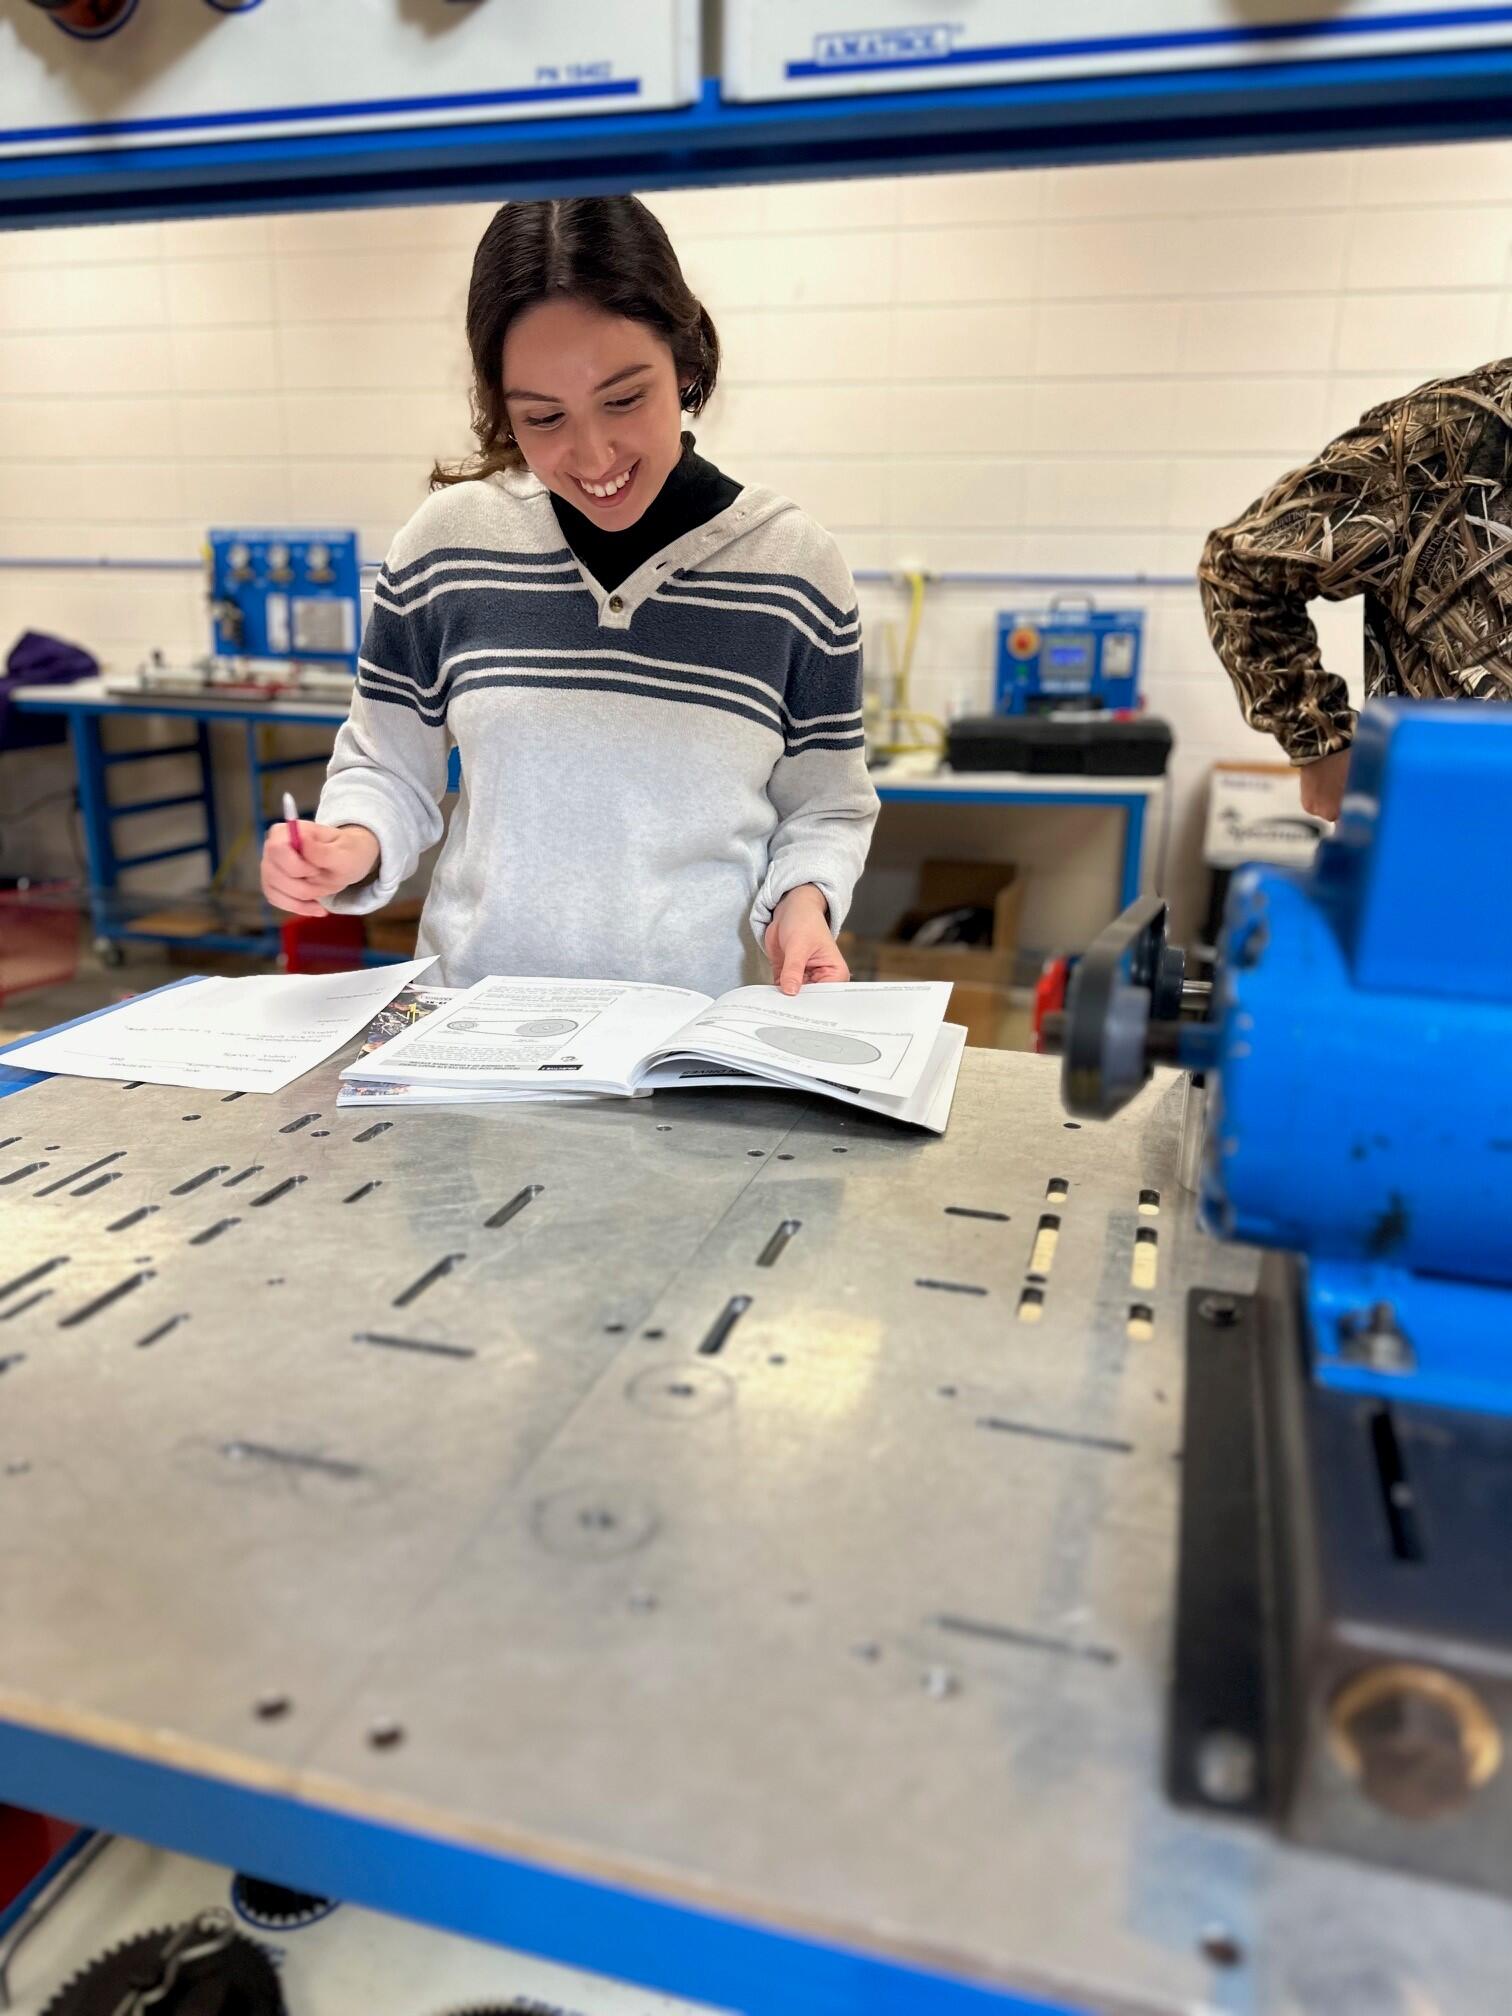 SLCC Industrial Technology student working on an assignment